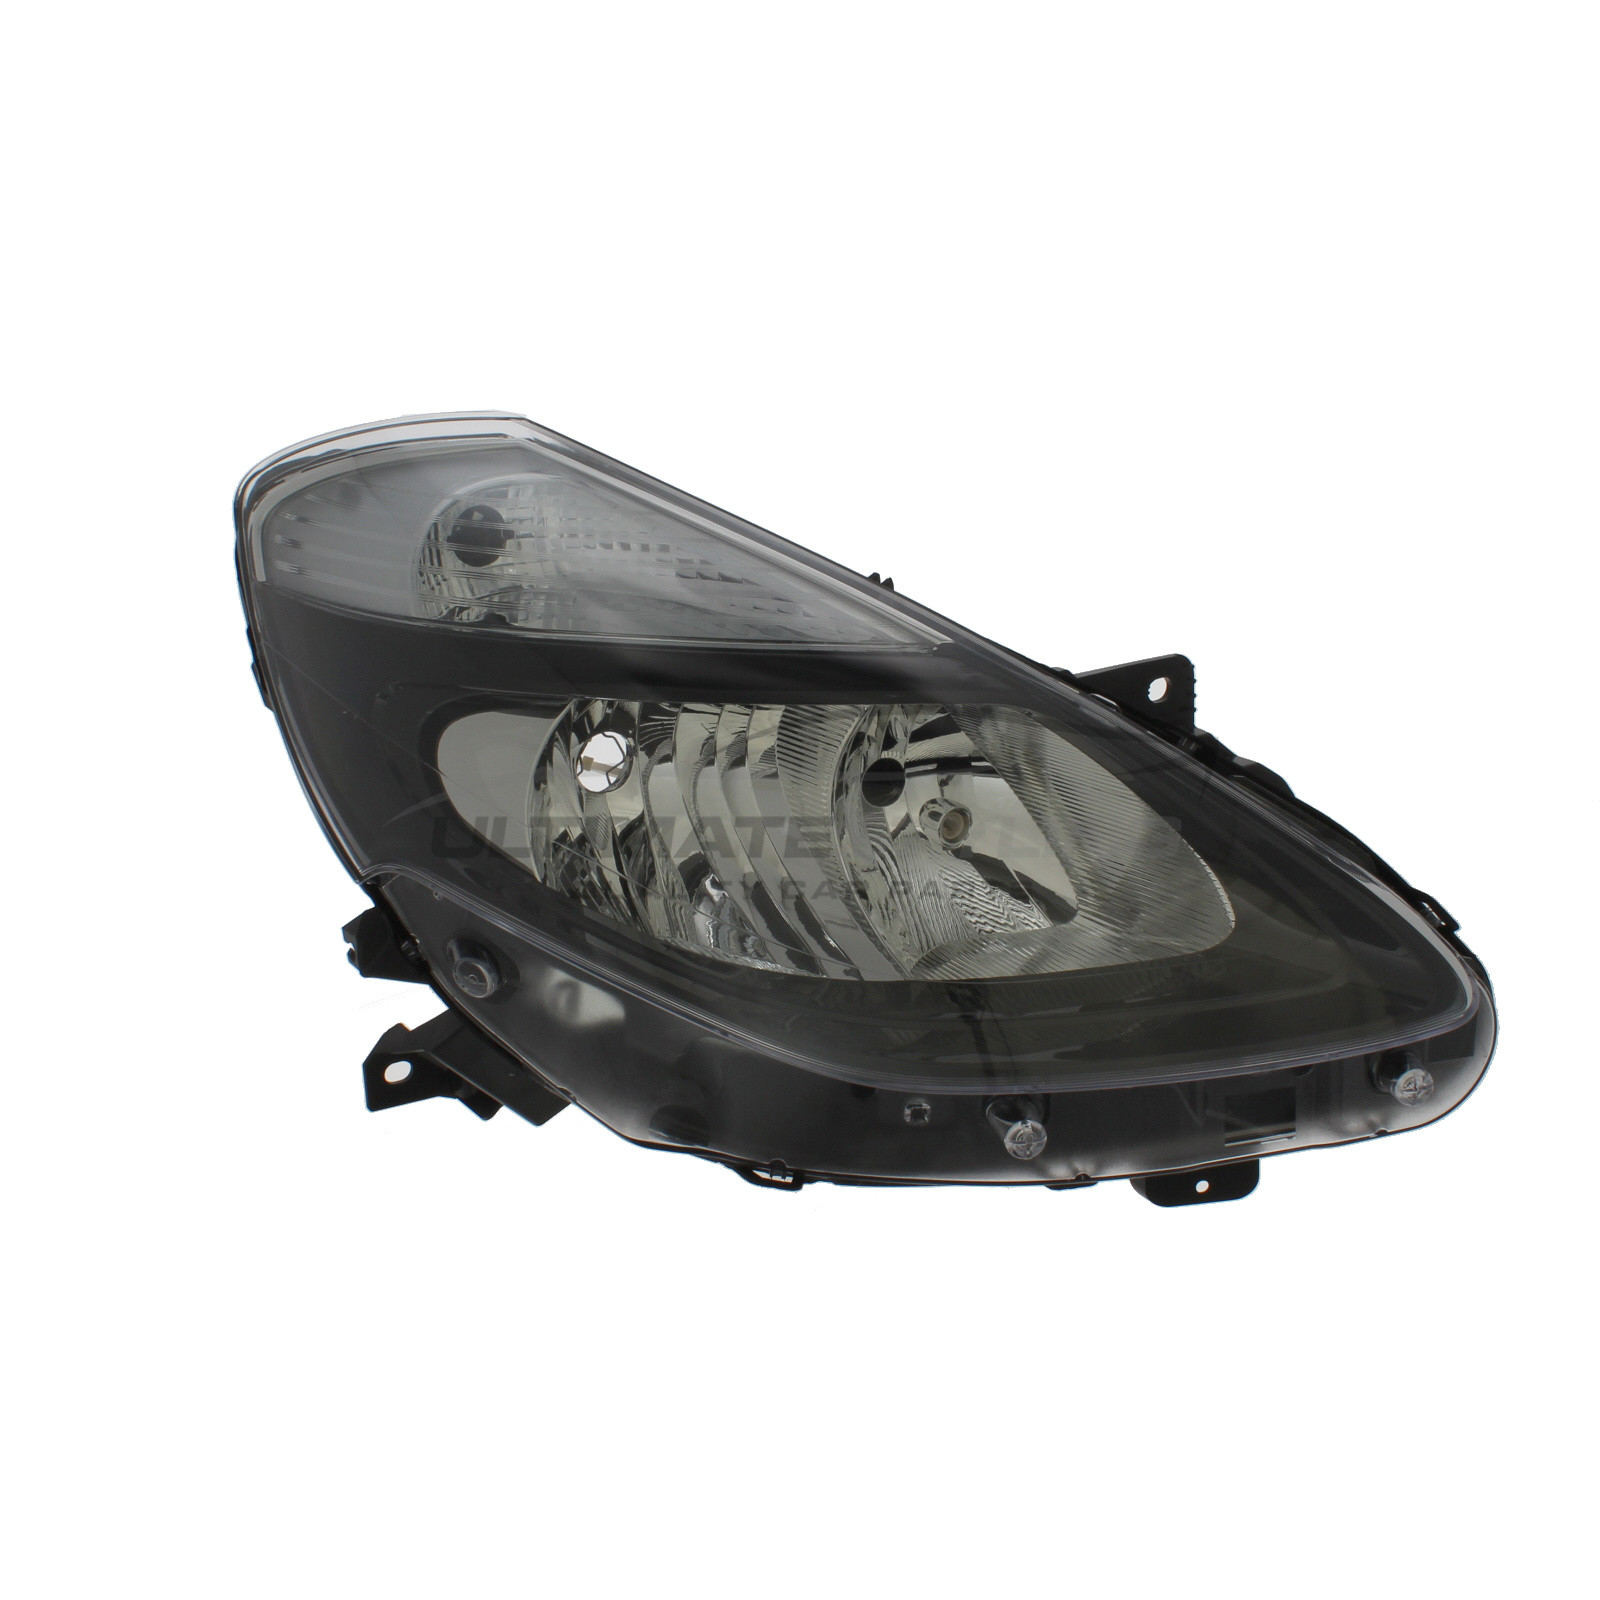 Renault Clio 2009-2013 Halogen, Electric Without Motor, Black Headlight / Headlamp Drivers Side (RH)